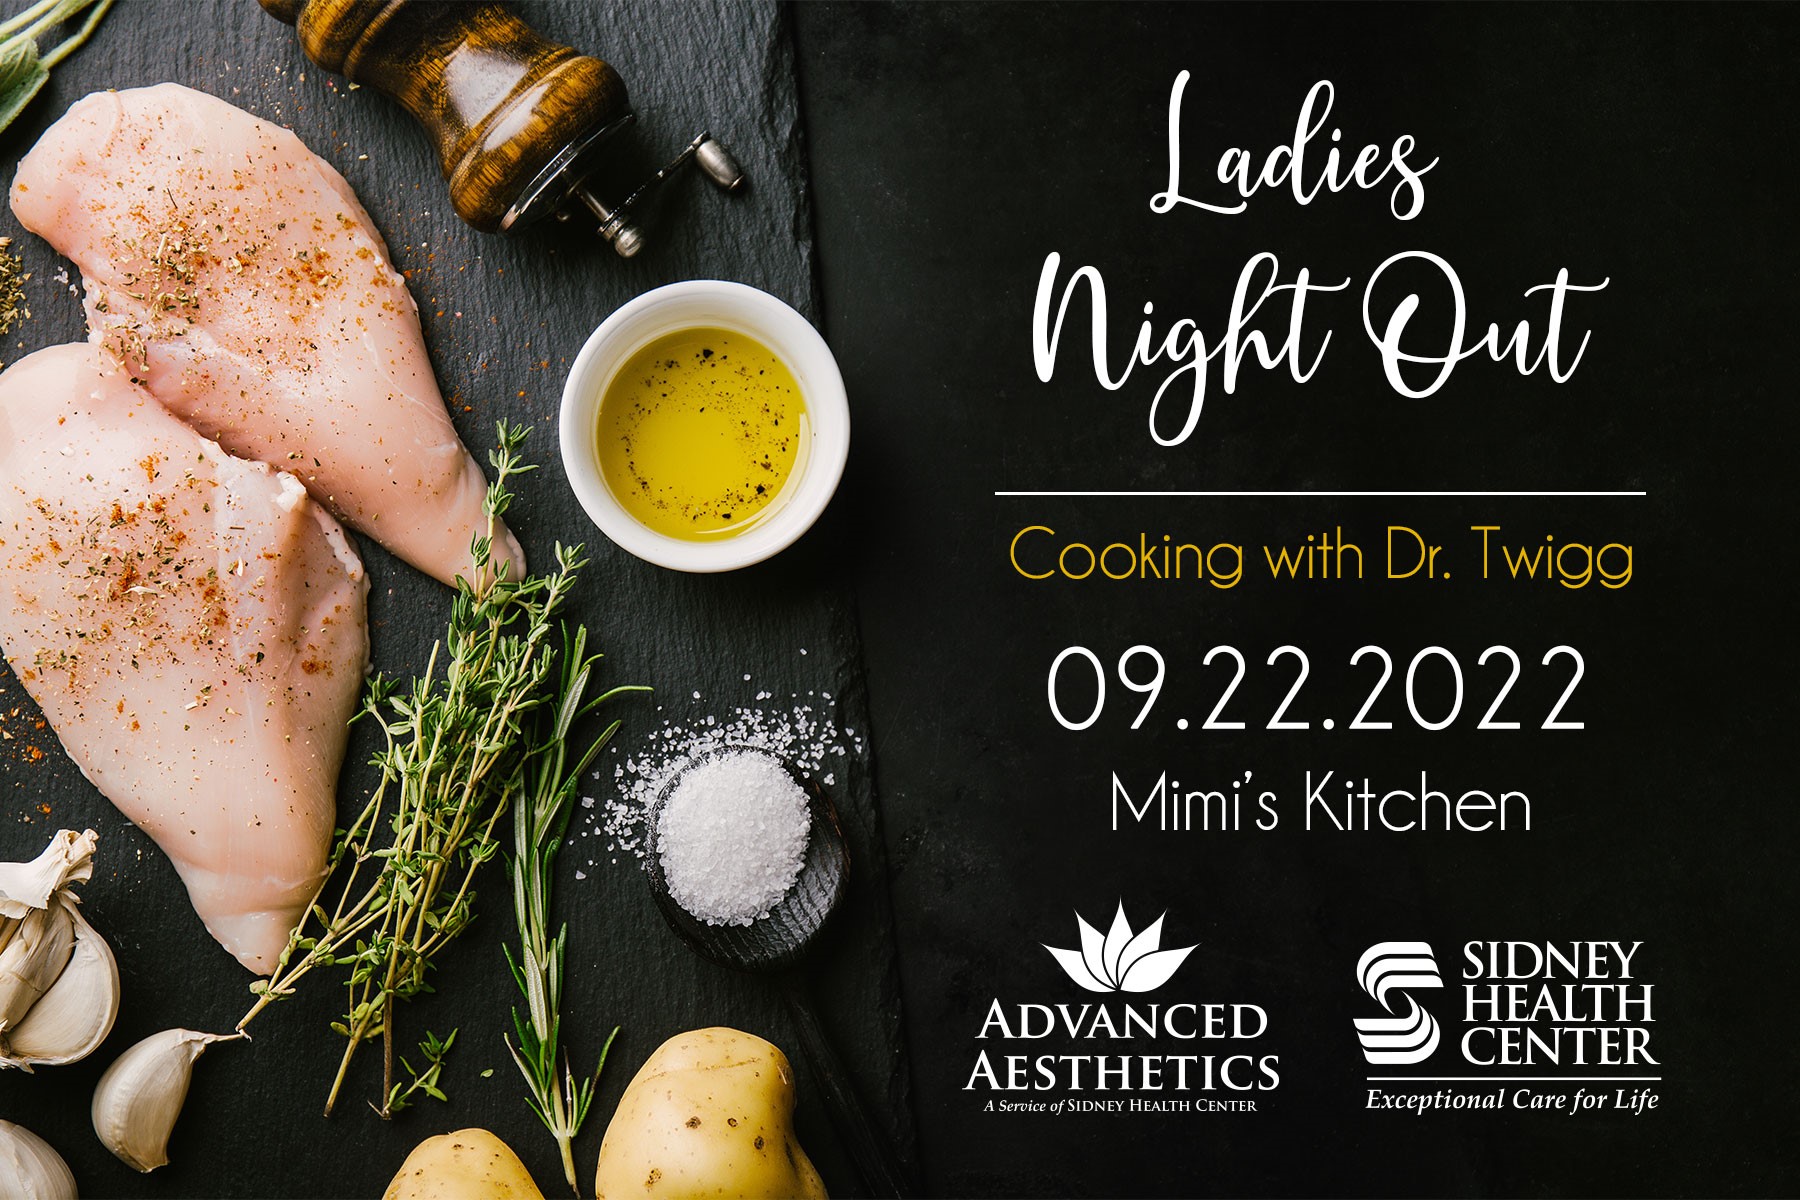 Ladies Night Out: Cooking with Dr. Twigg